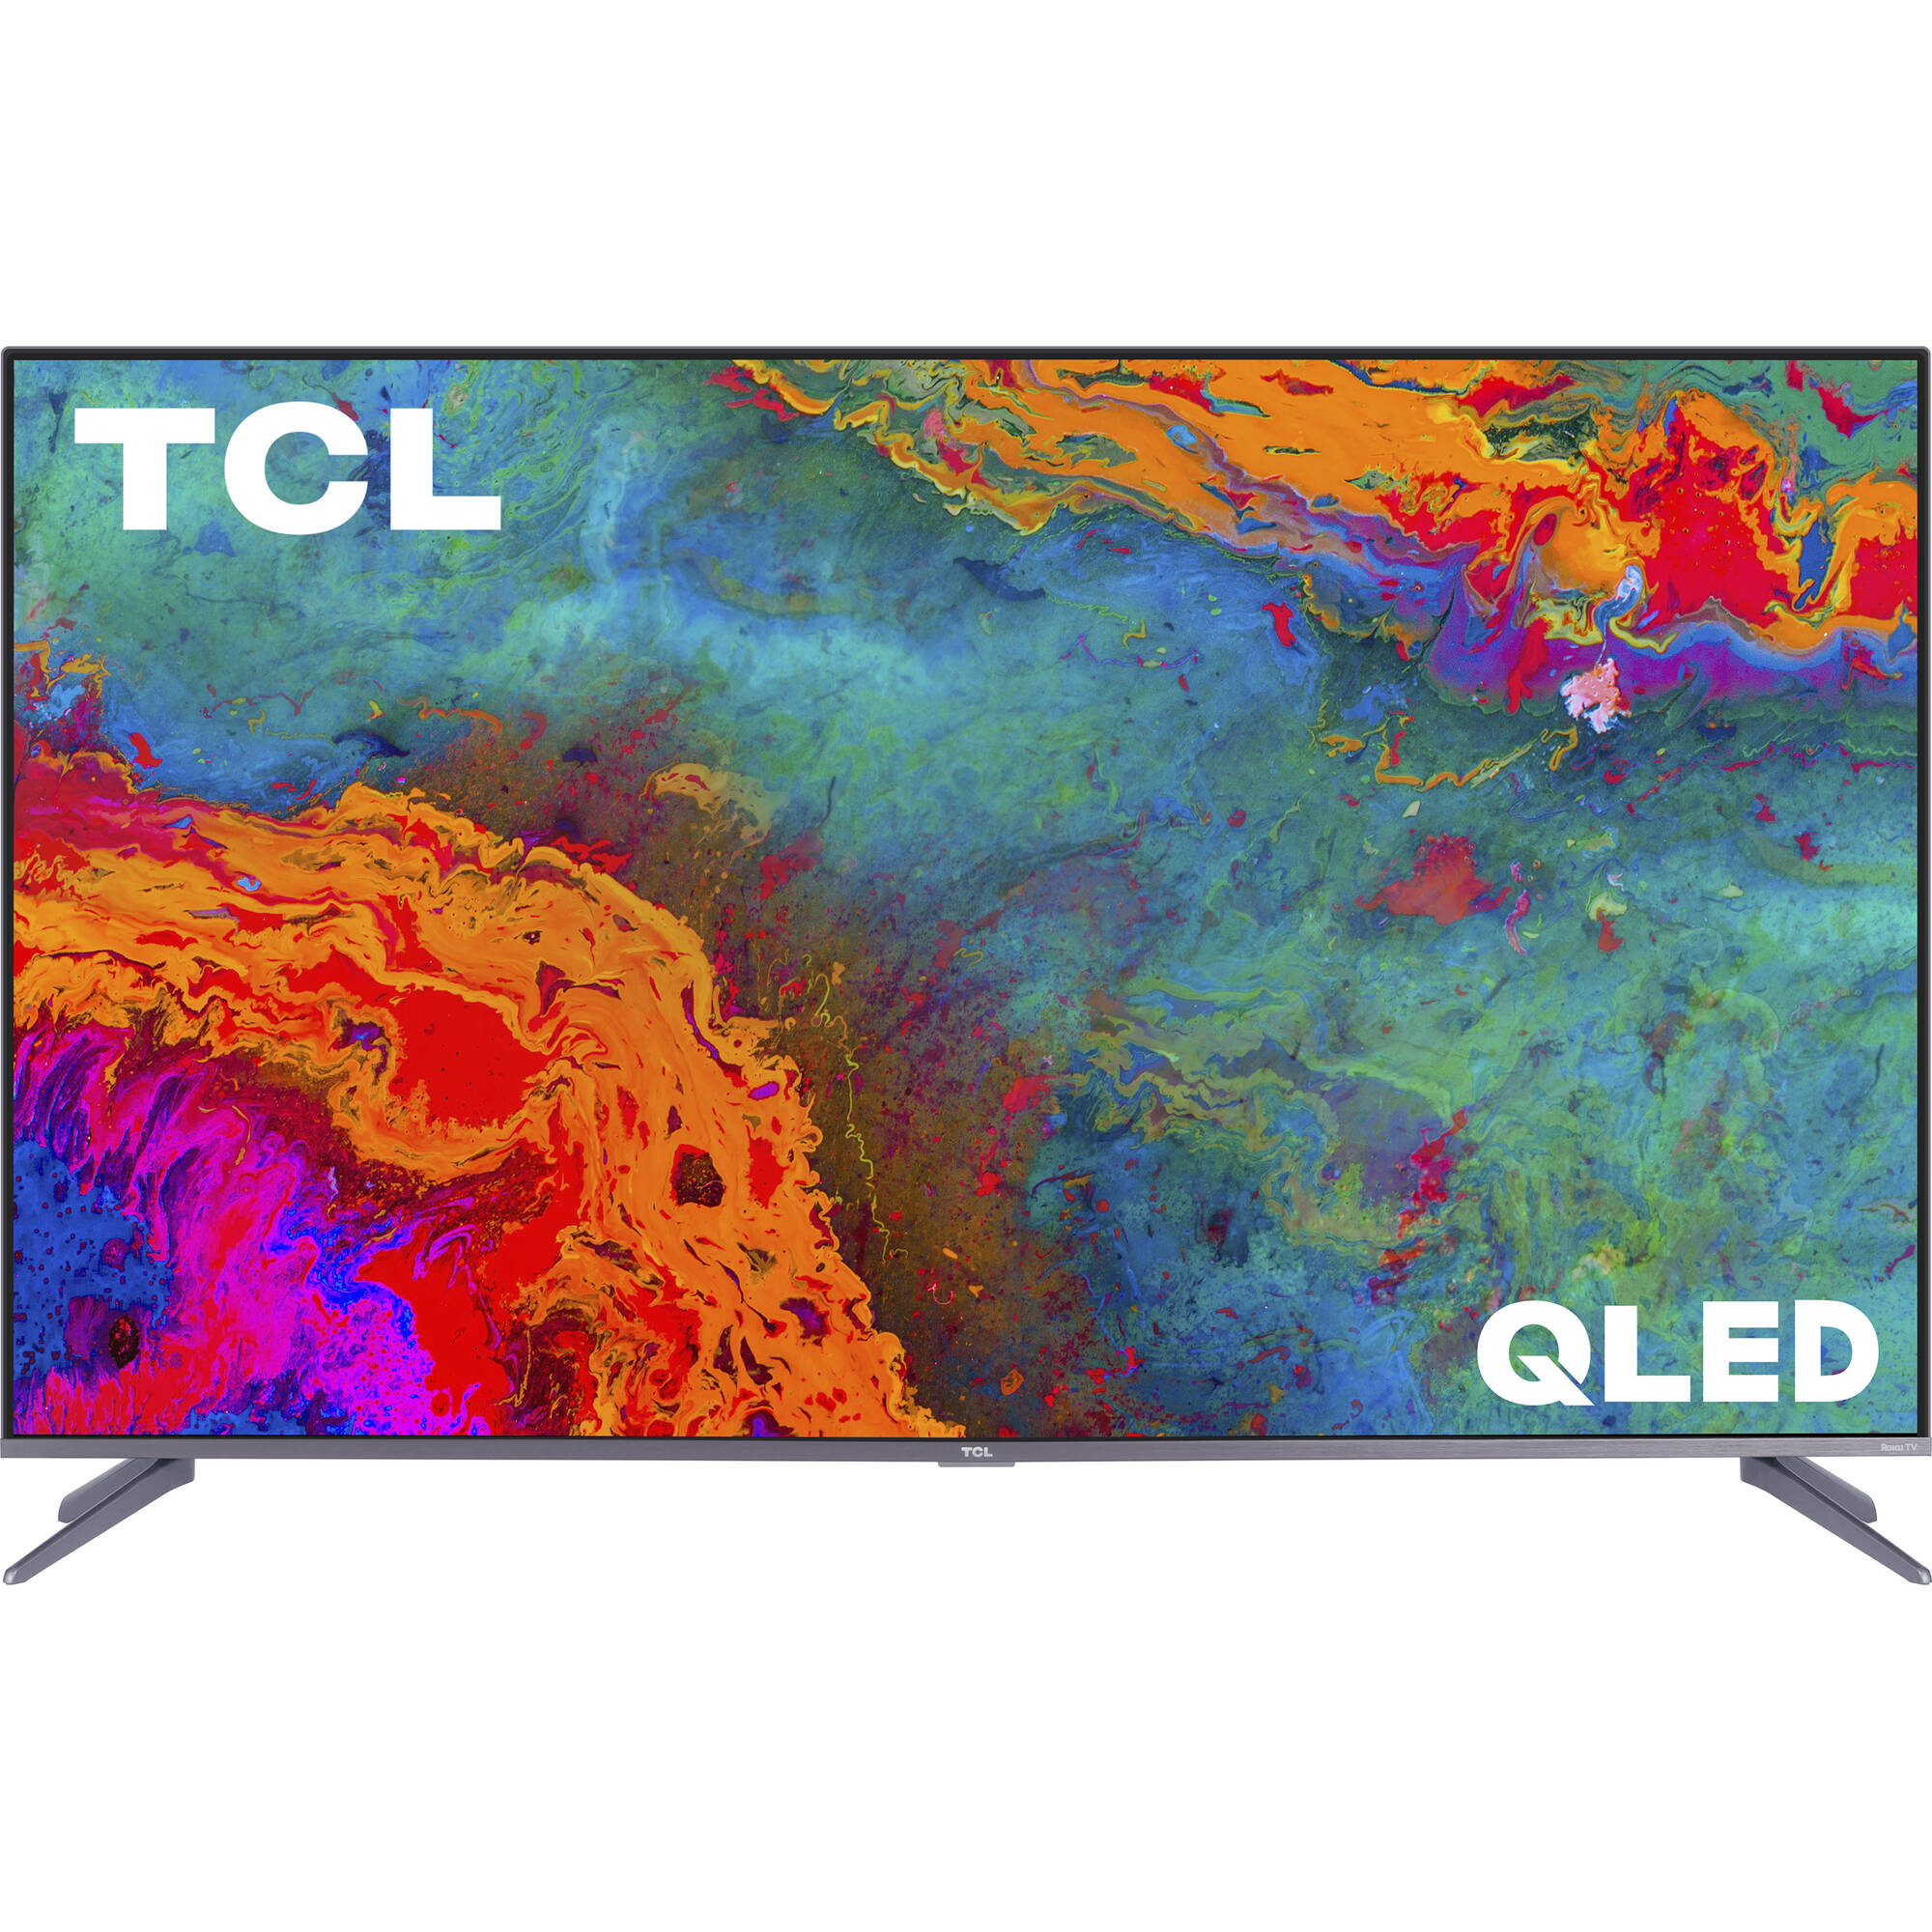 TCL 5-Series S535 50 "Clase HDR 4K UHD Smart Qled TV